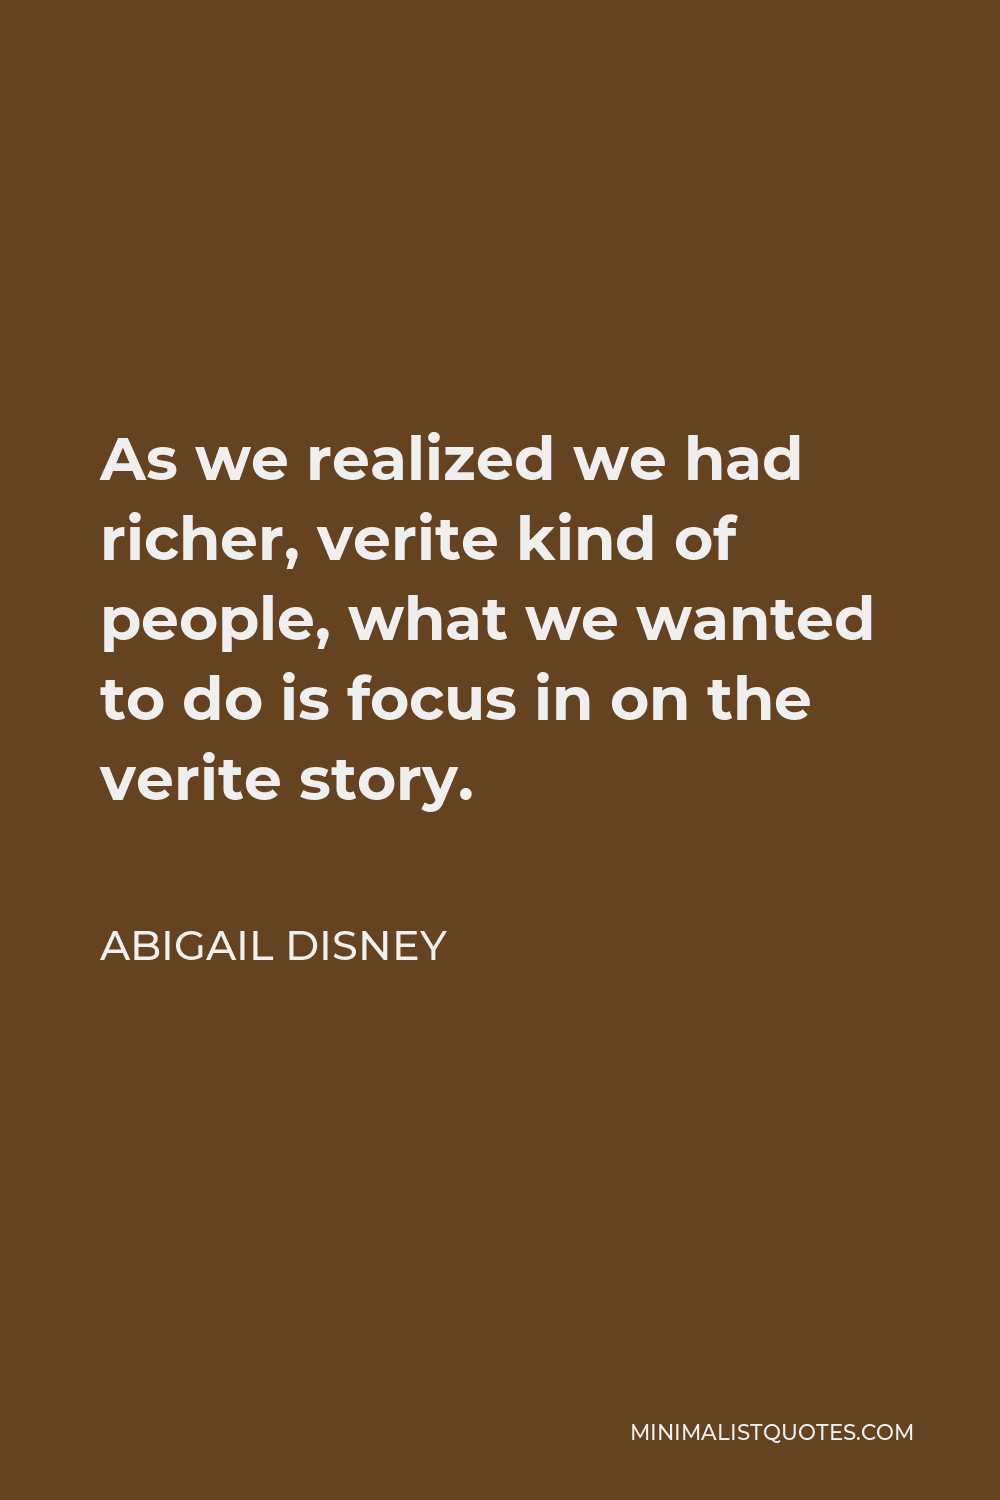 Abigail Disney Quote - As we realized we had richer, verite kind of people, what we wanted to do is focus in on the verite story.